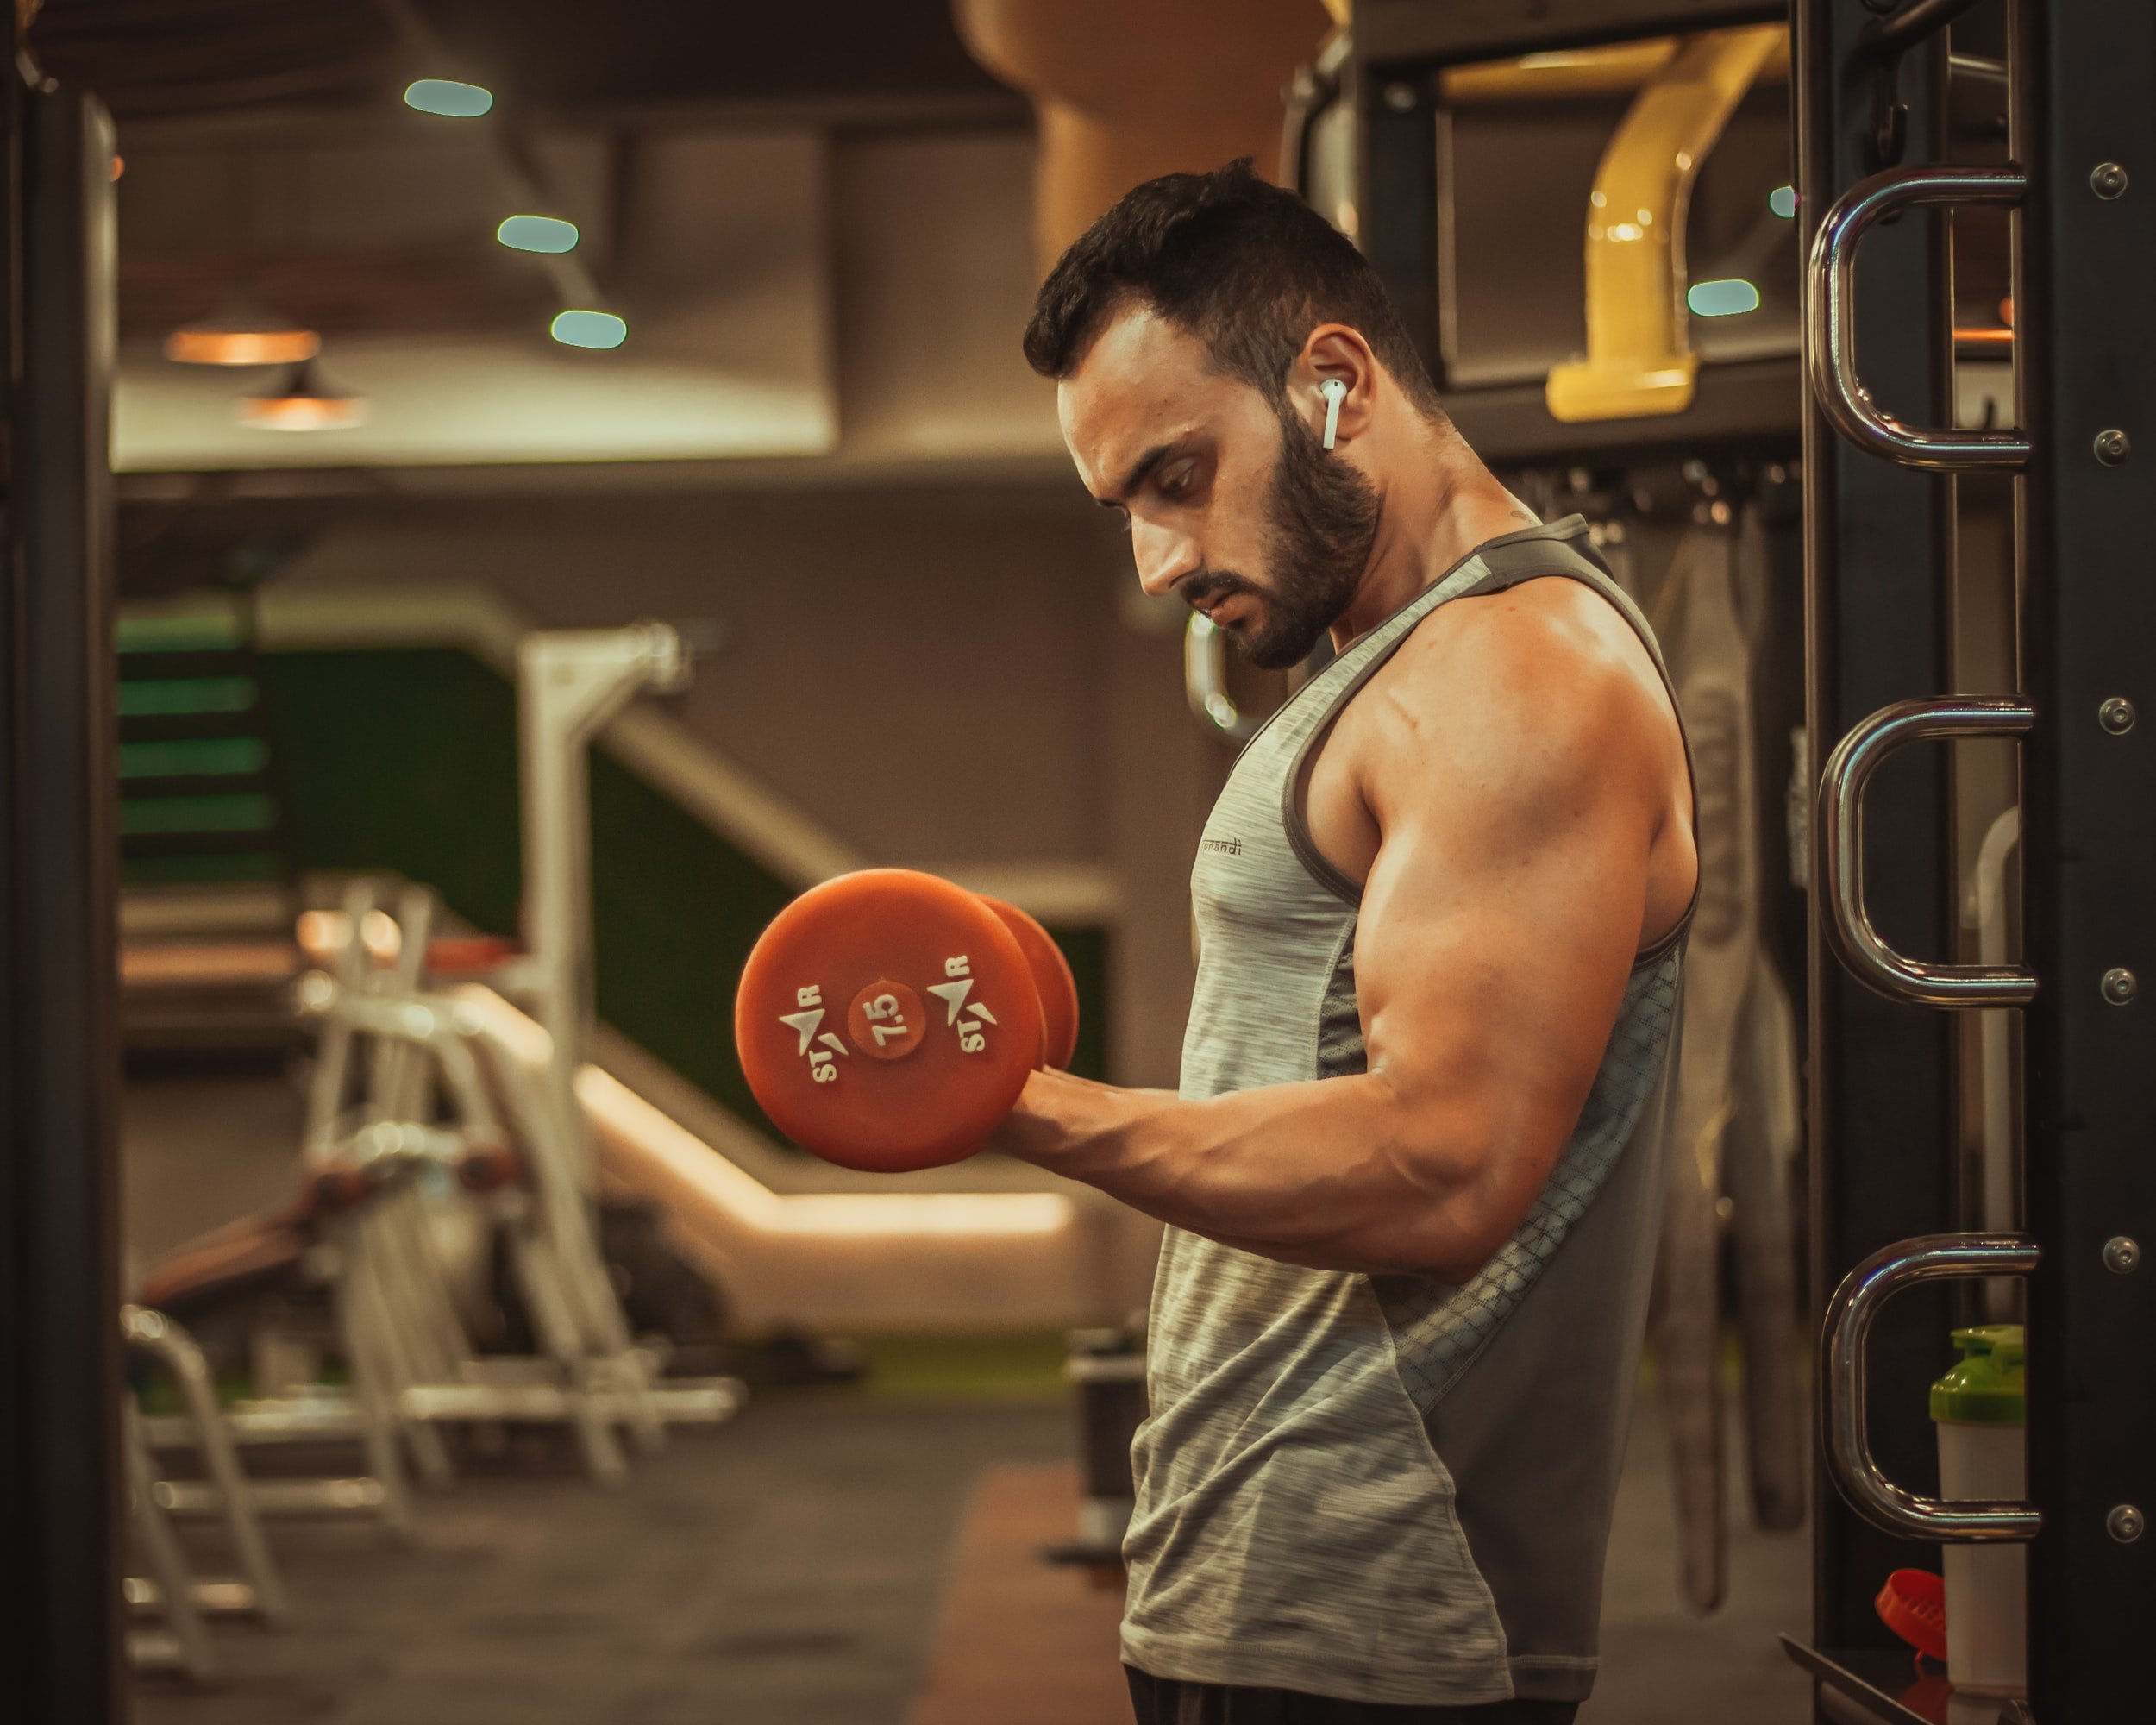 metabolic stress mechanical tension 3 factors of hypertrophy what is metabolic stress mechanical tension hypertrophy how to maximize hypertrophy mechanical tension vs metabolic stress metabolic stress hypertrophy metabolic stress muscle growth metabo